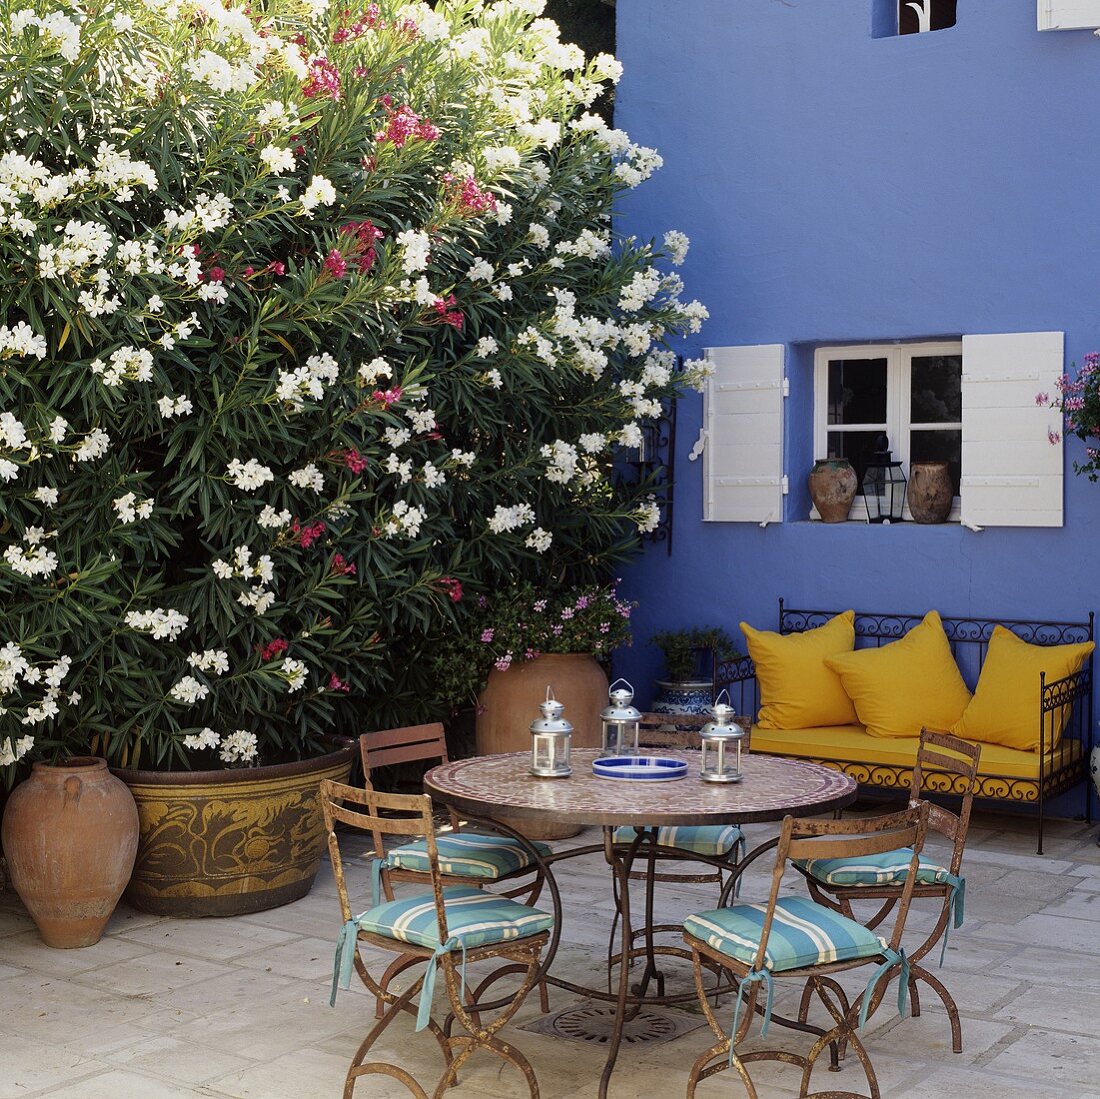 A blooming oleander next to a metal bench with and yellow cushions against a blue house wall